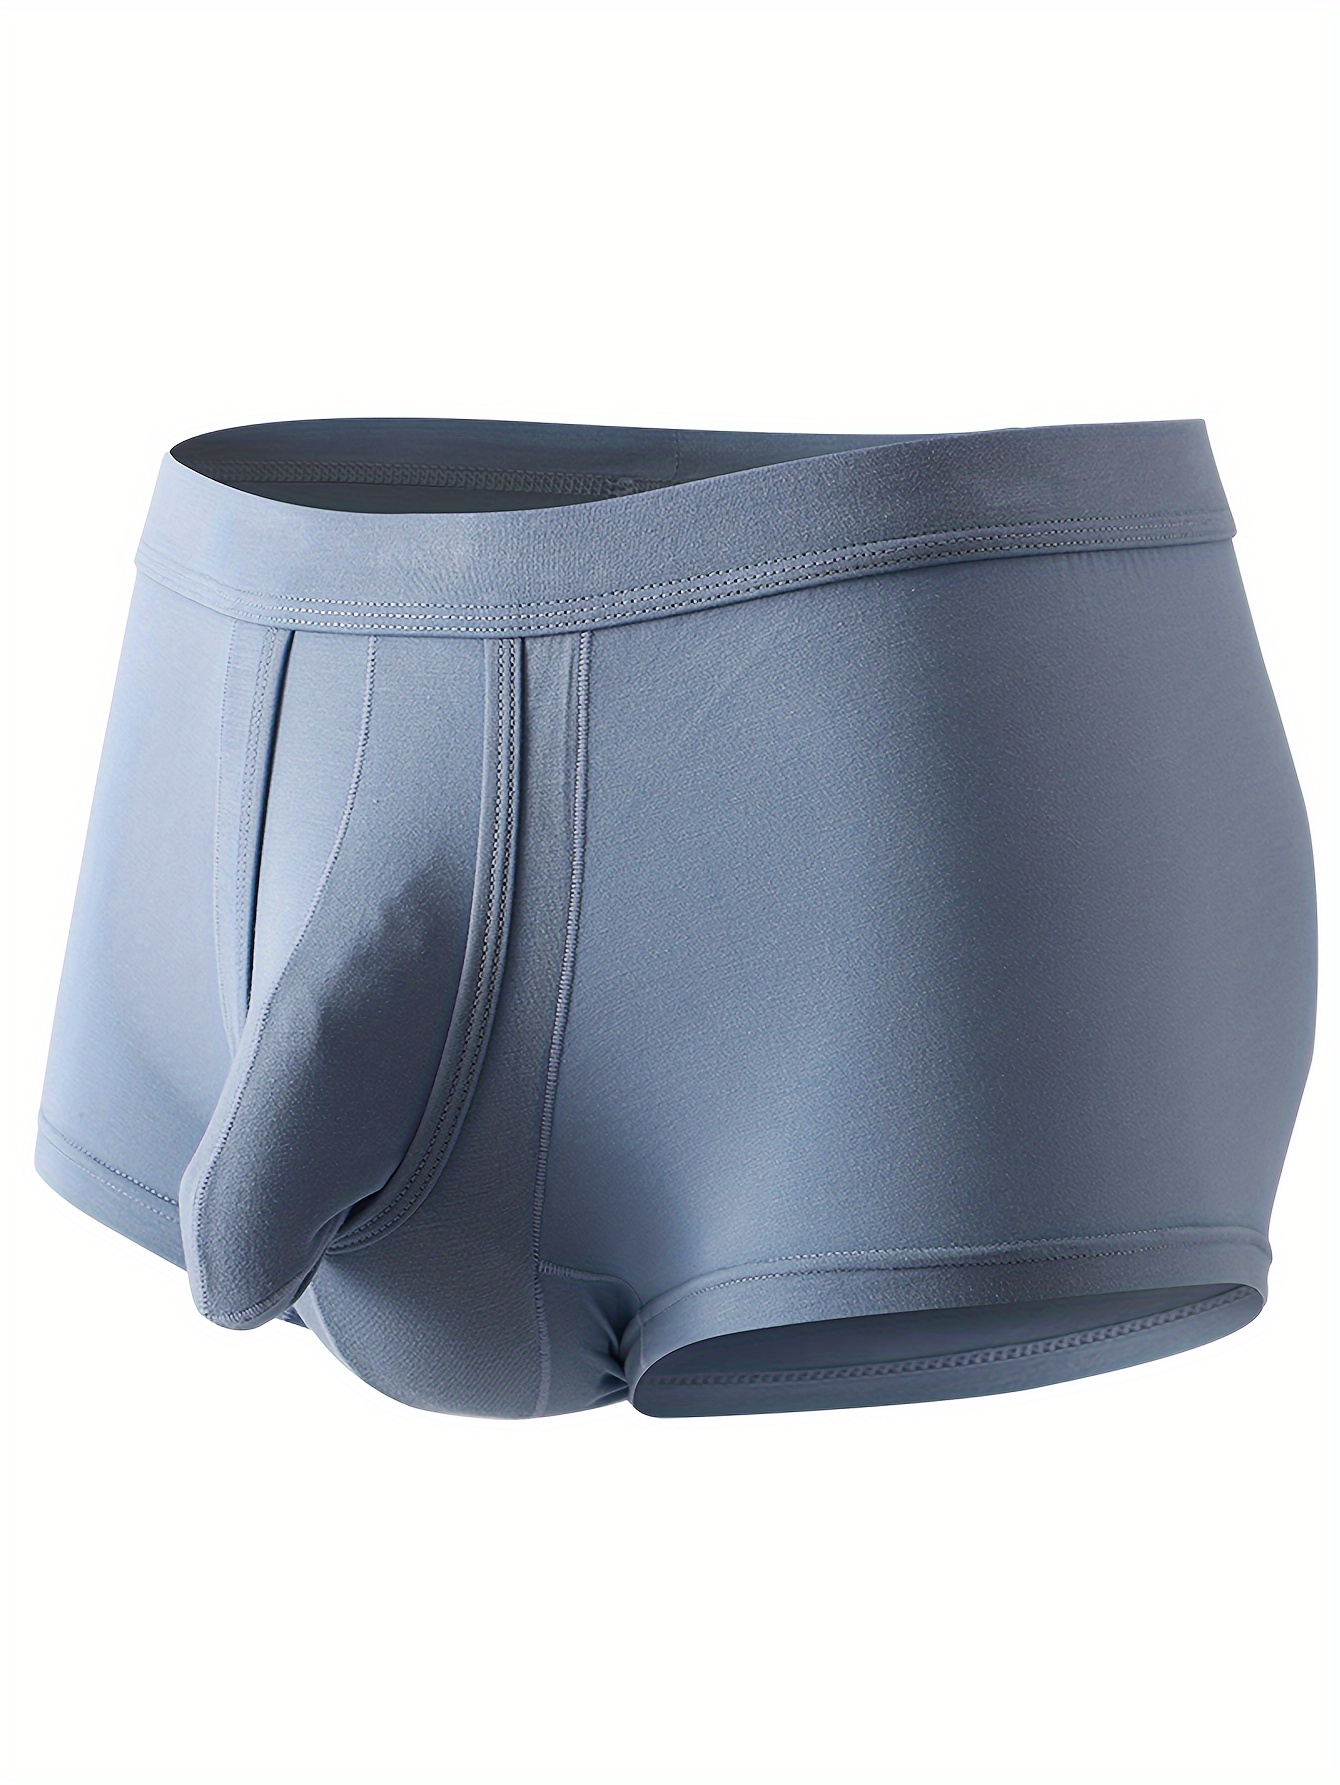 Why The Underwear Pouch is the Single Most Important Part of the Boxer –  Manmade